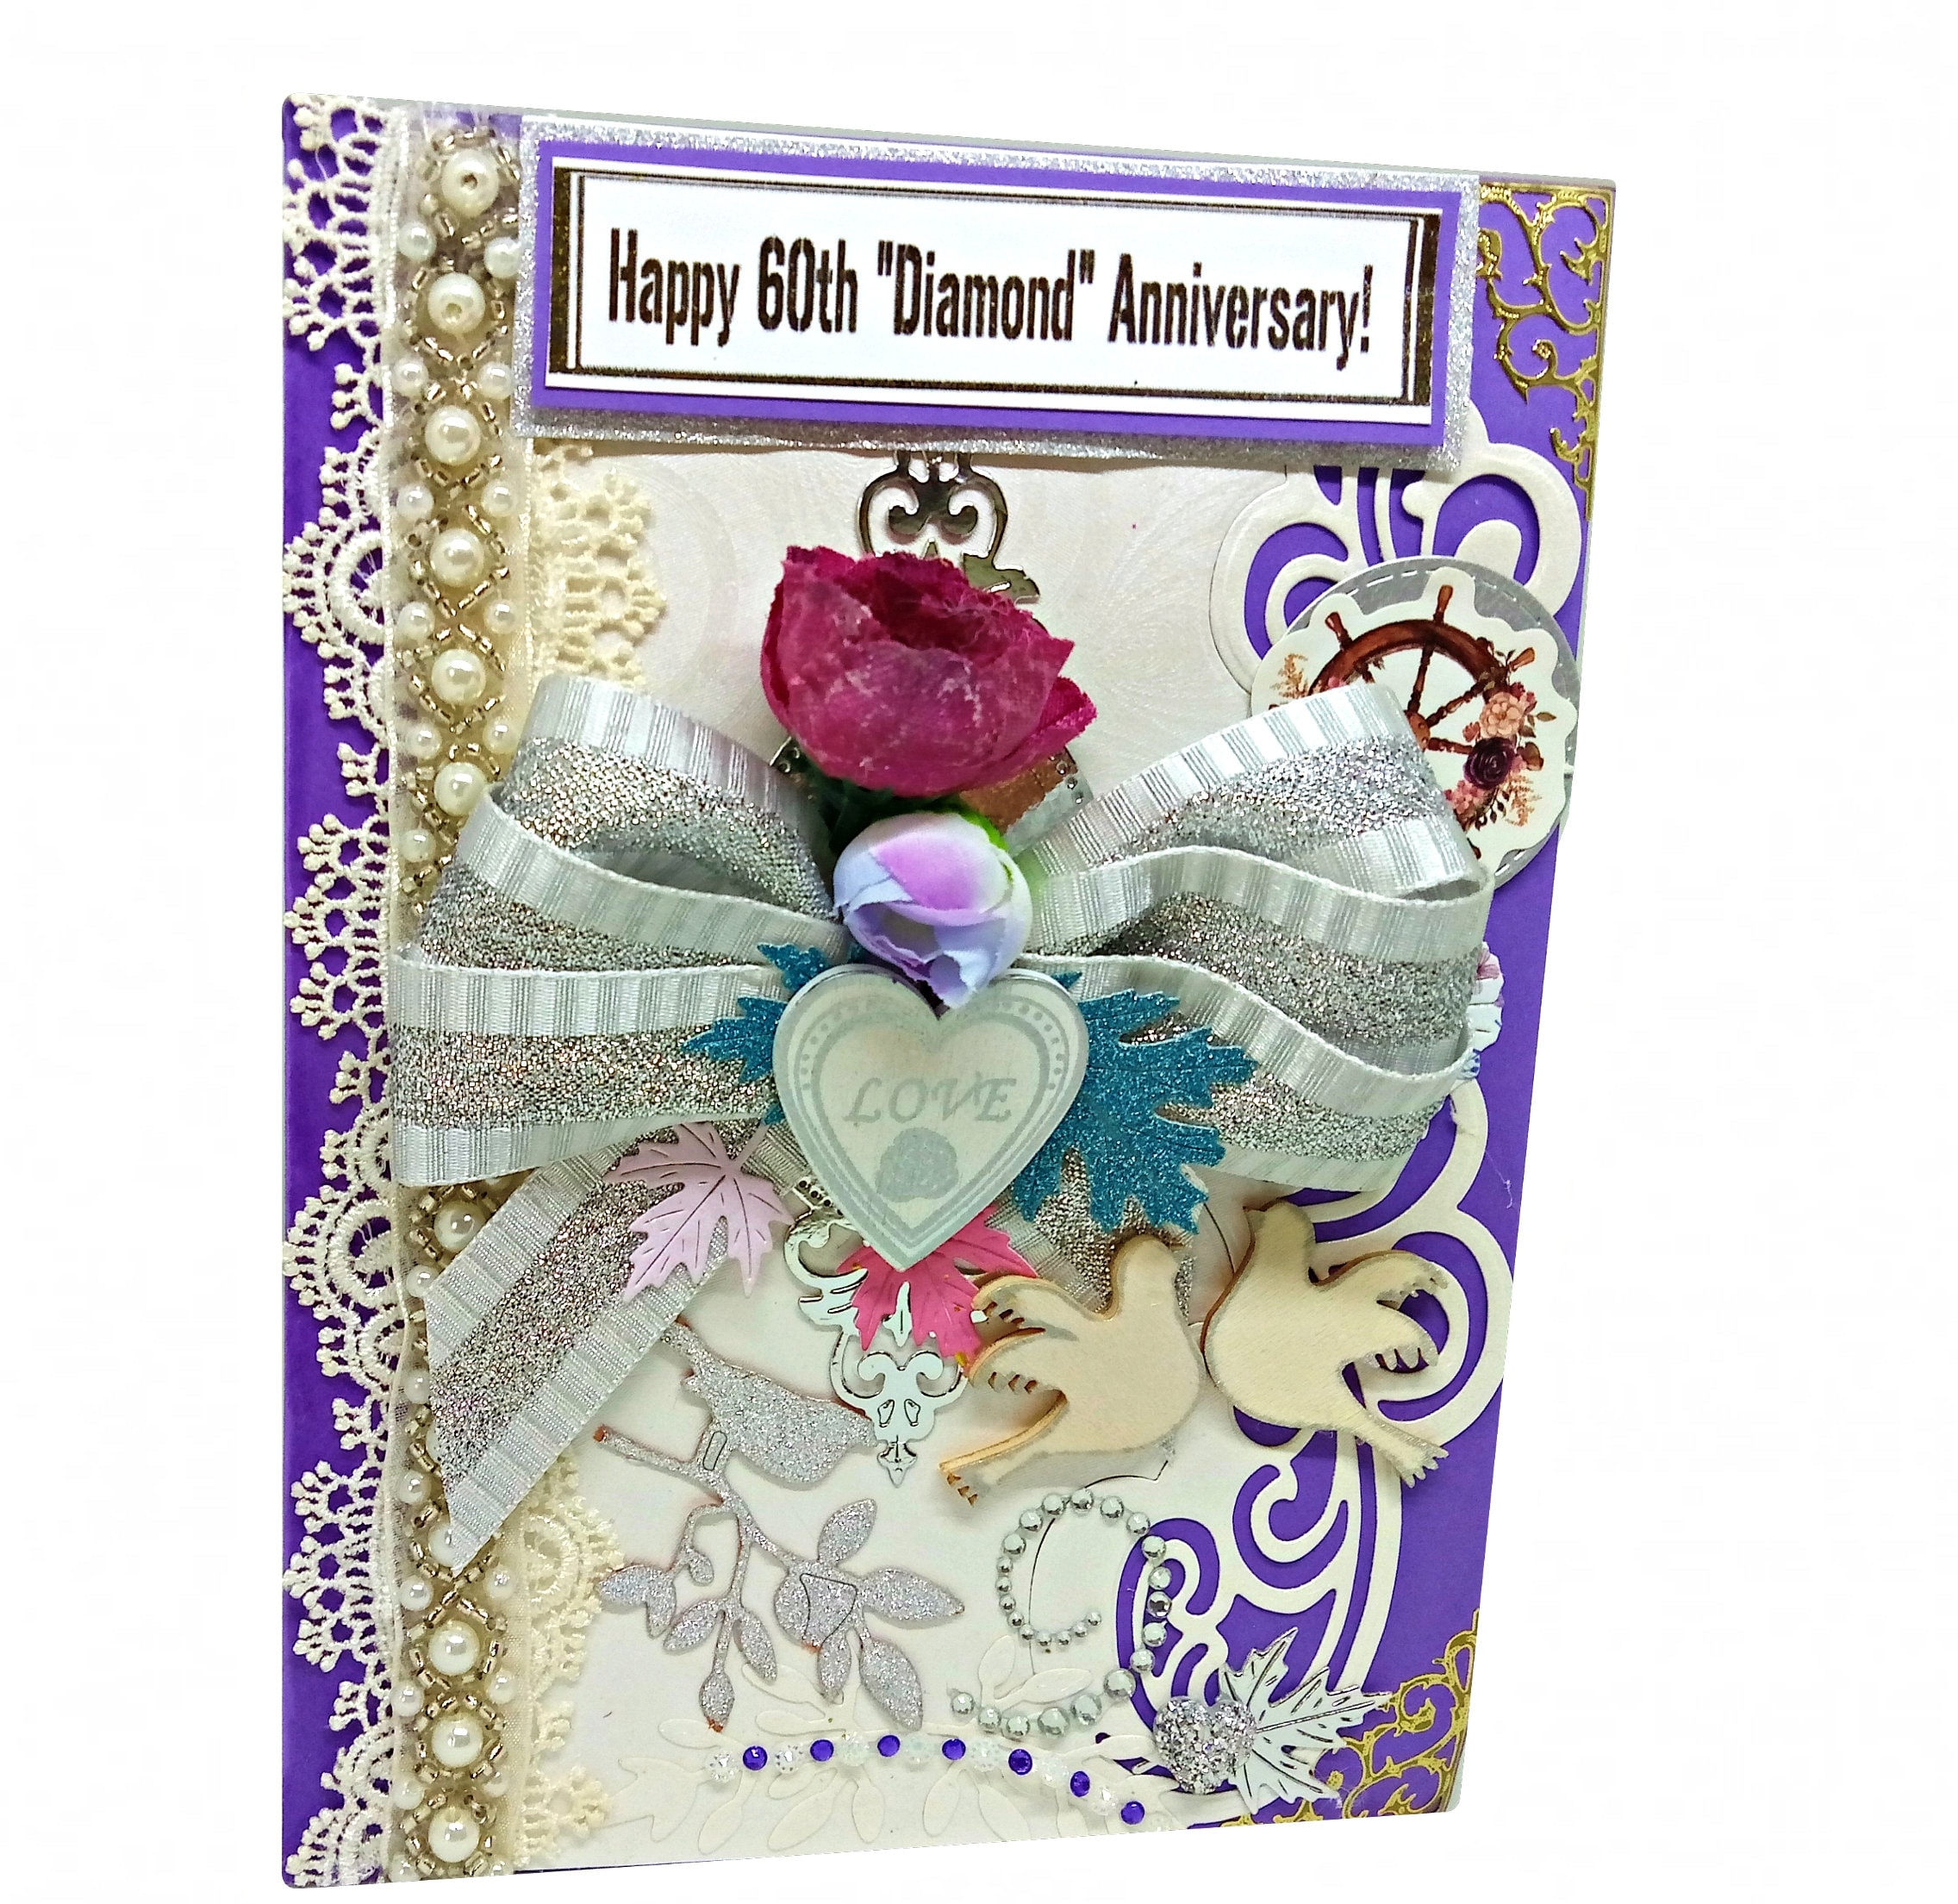 Diamond 60th Wedding Anniversary Card With Embossed Hearts Home